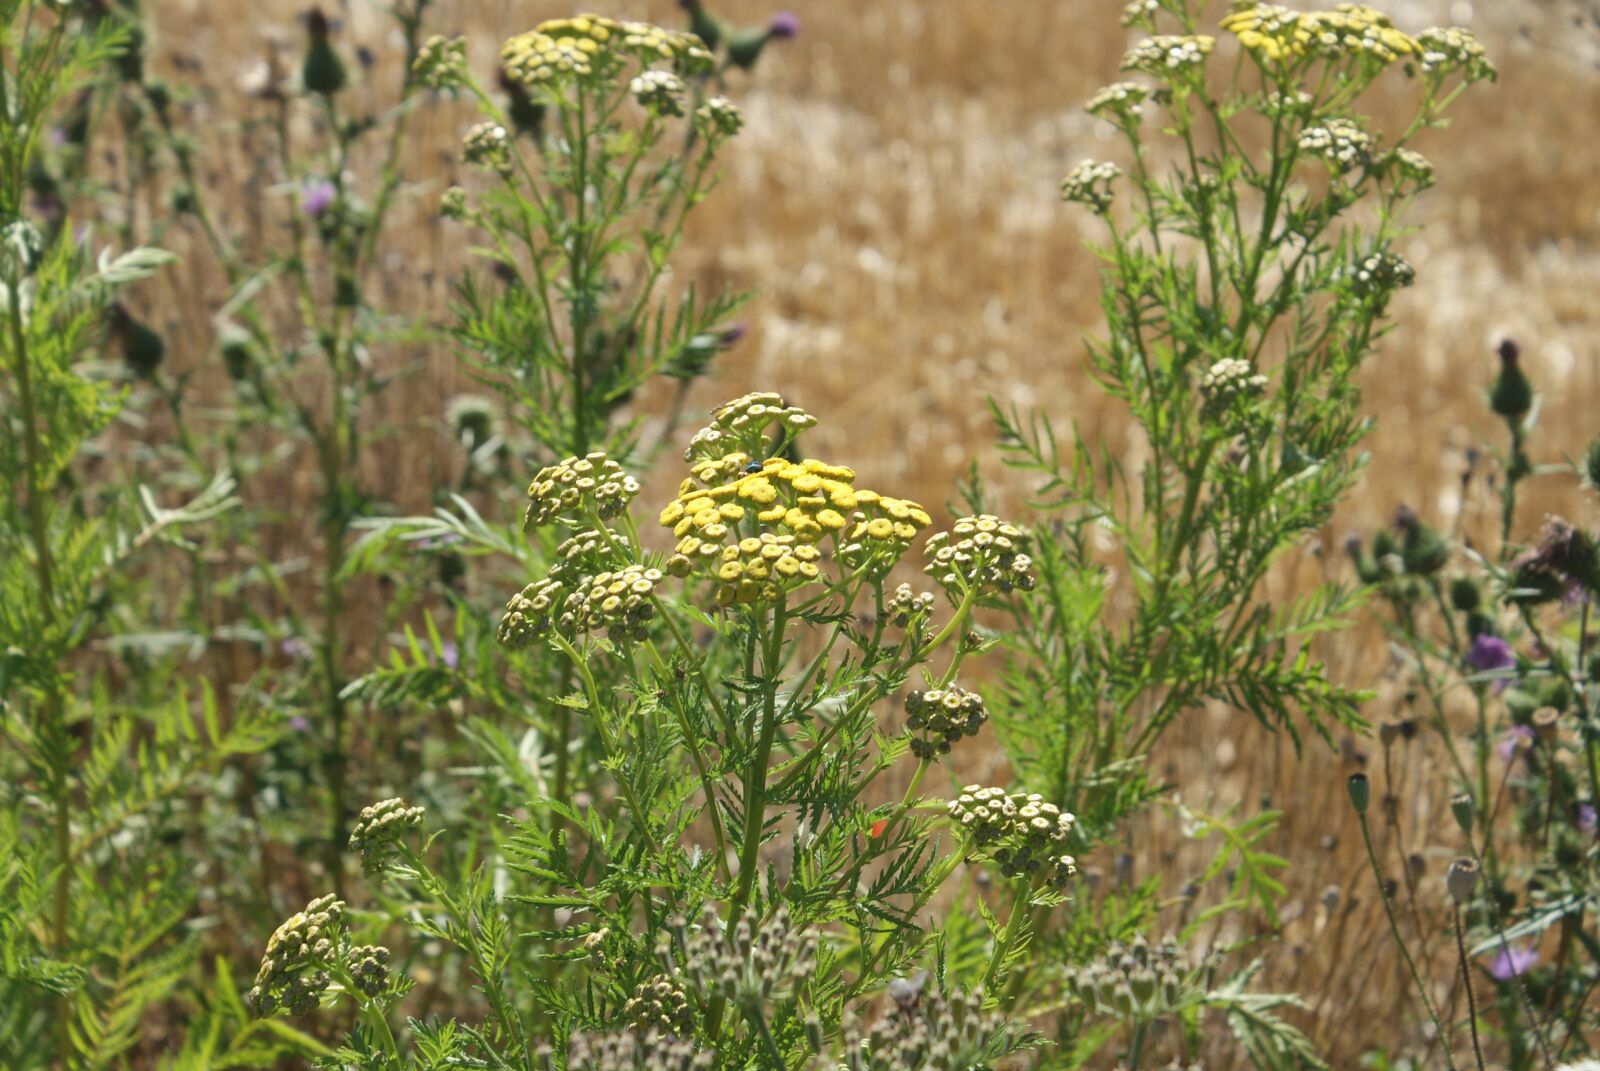 Sony Alpha DSLR-A200 sample photo. Field, summer, nature photography